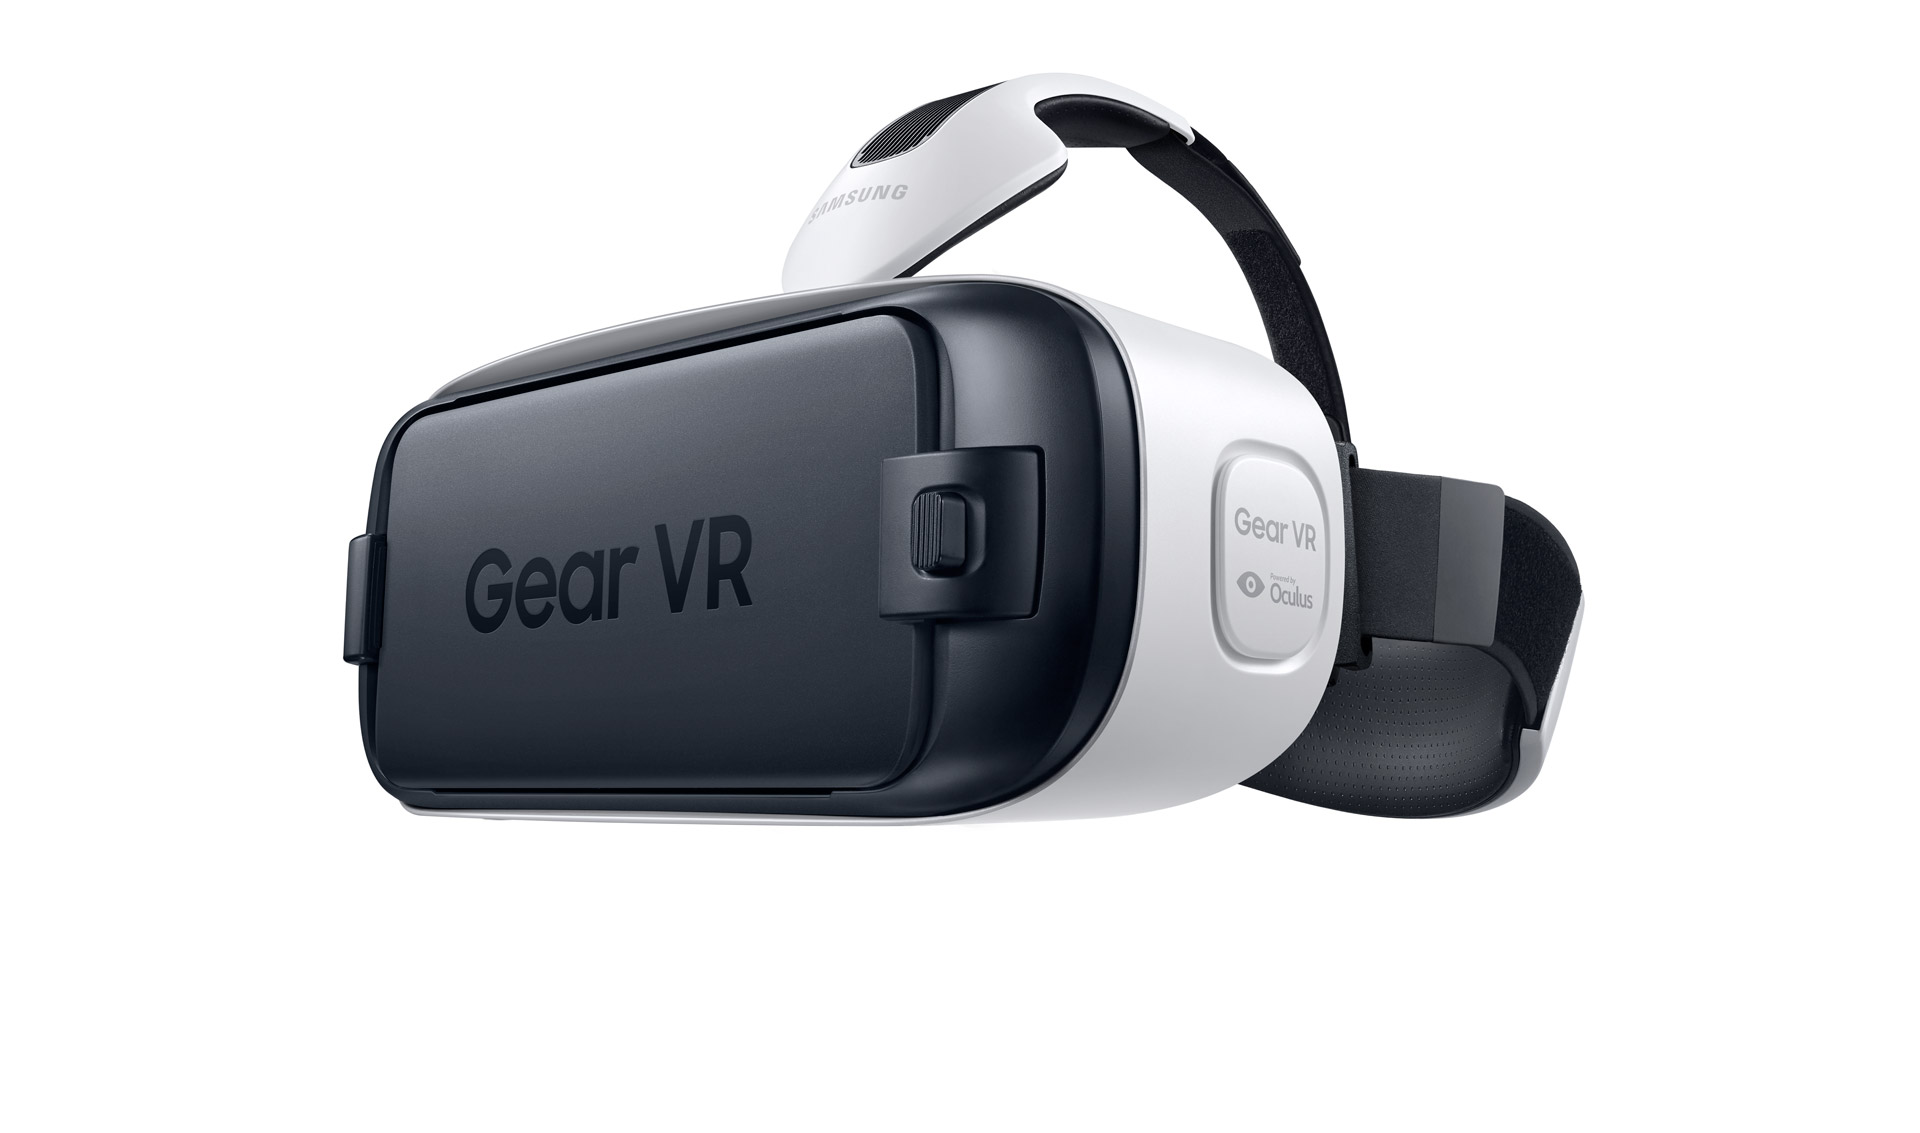 New Gear VR for Galaxy S6 and S6 Edge Goes on Sale May 8th U.S, Pre-orders Start Tomorrow – Road to VR